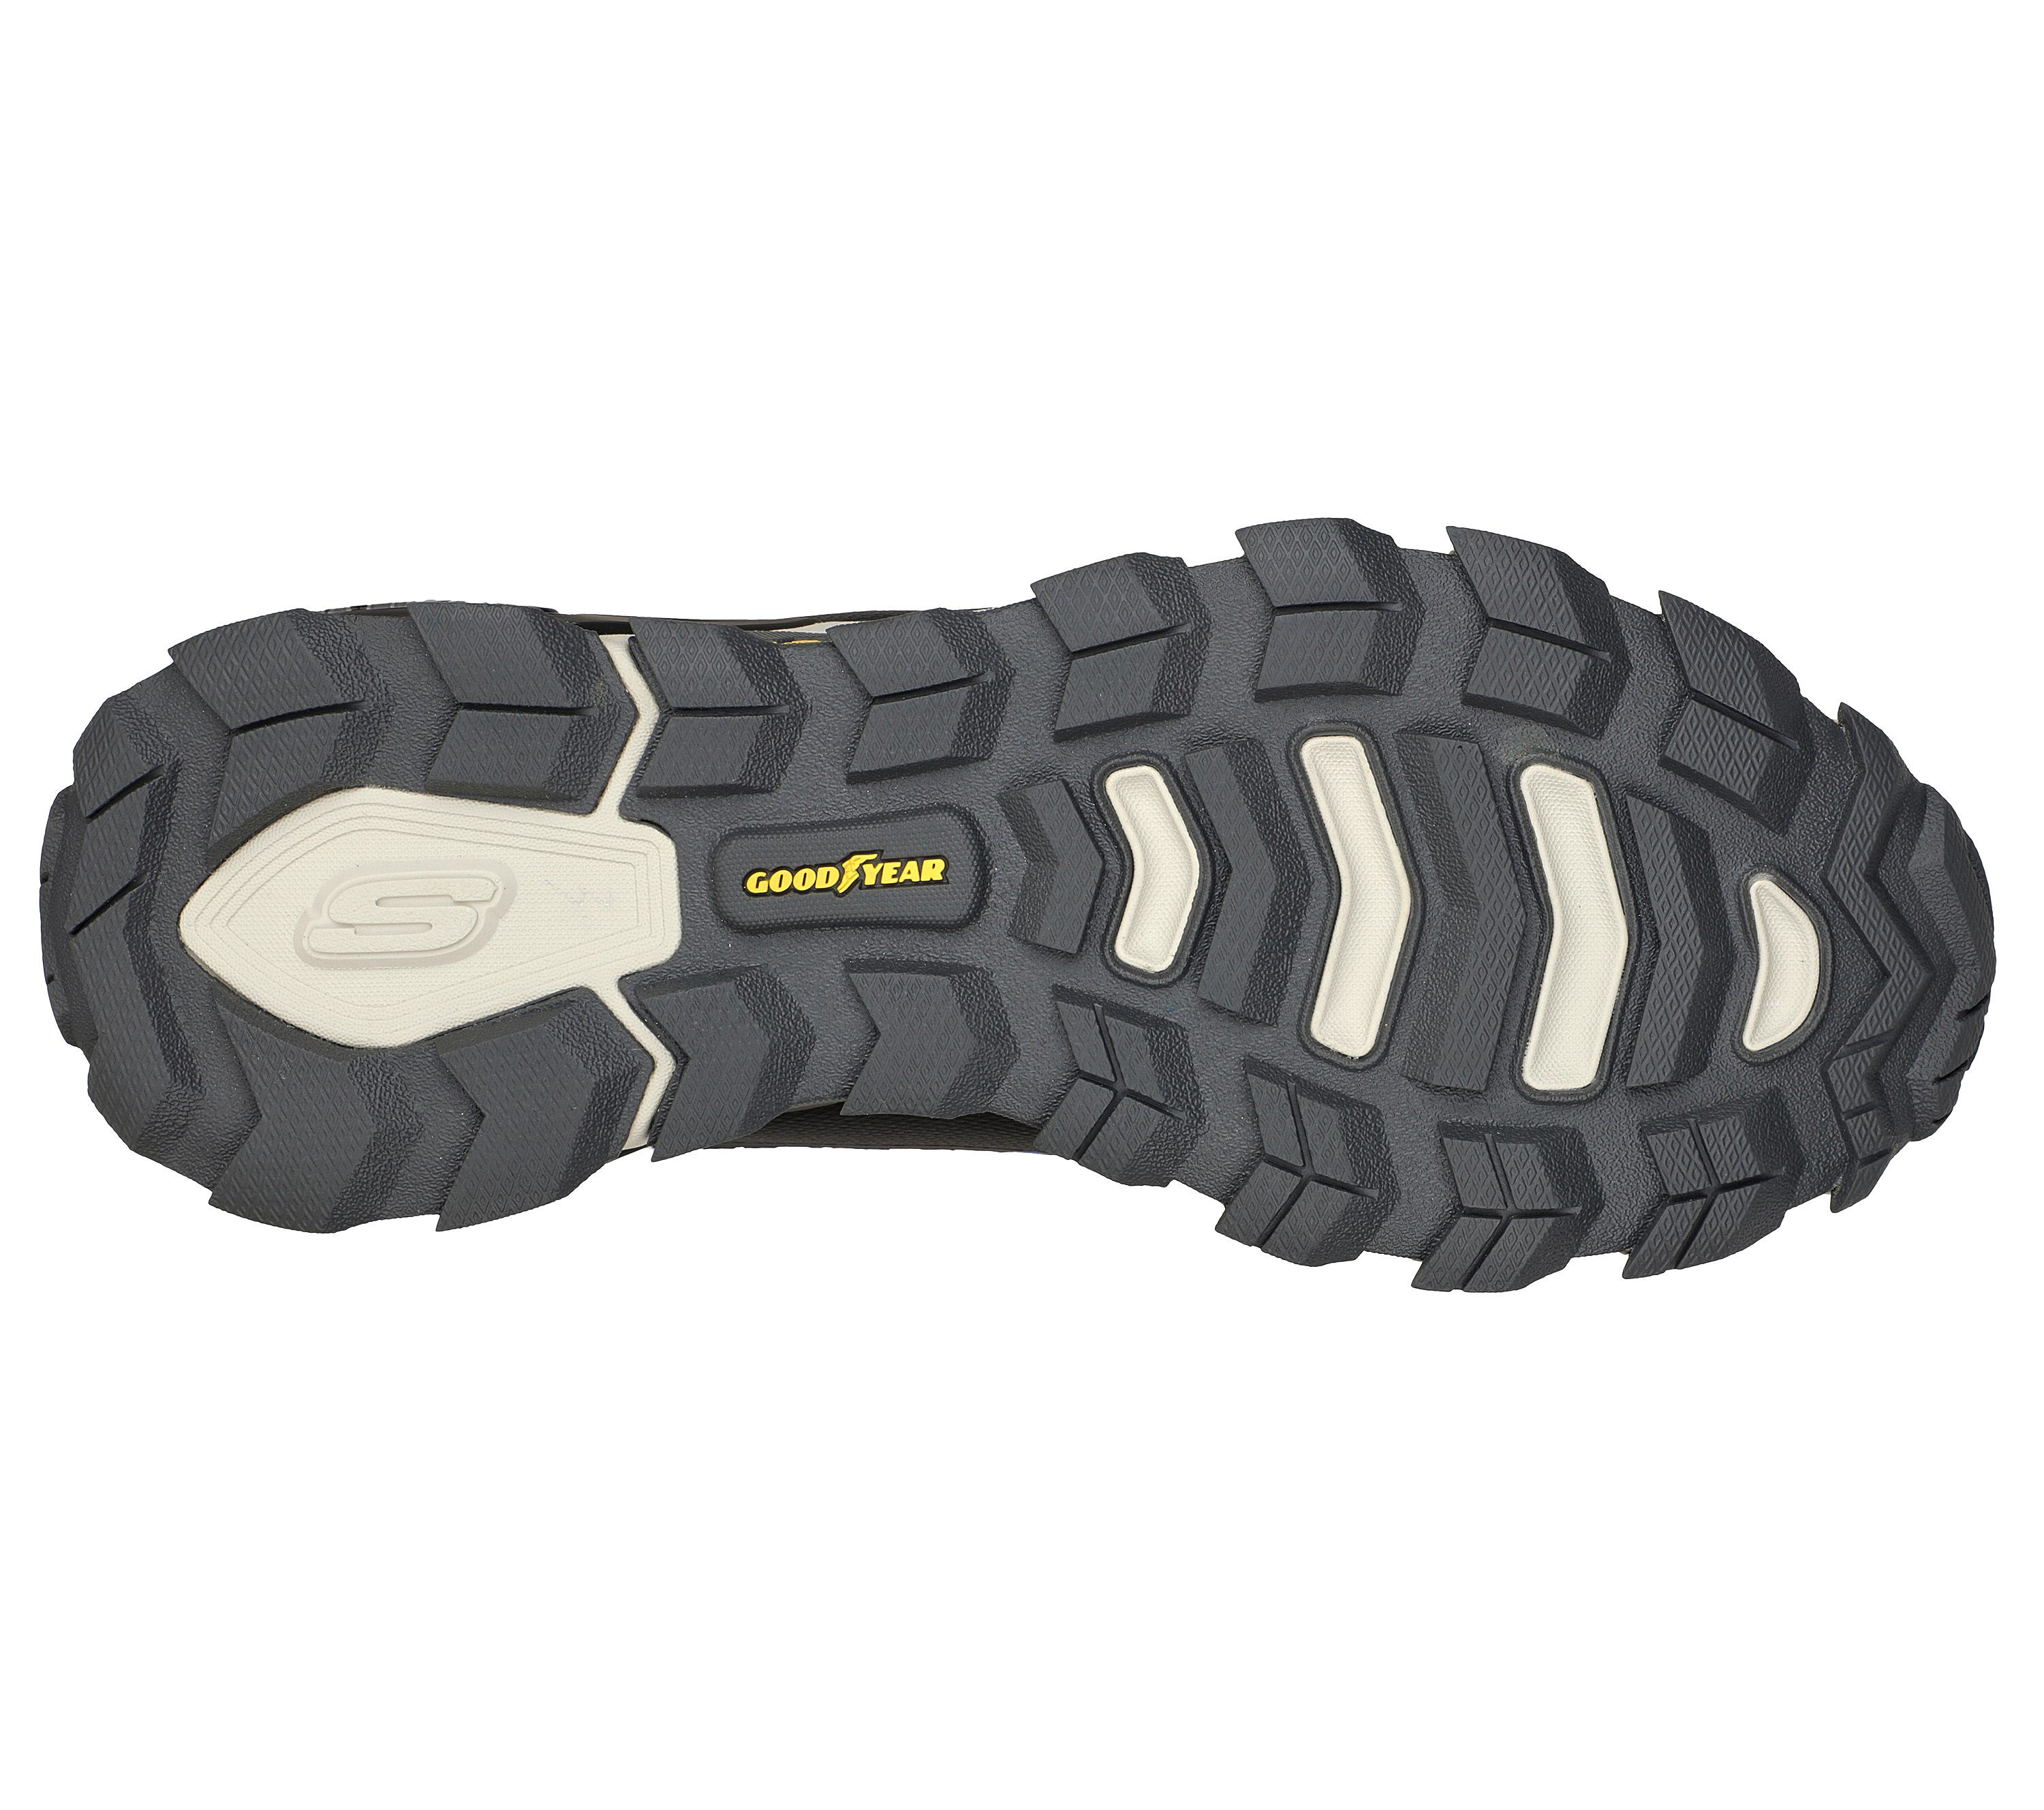 Max Protect - Fast Track | SKECHERS UK